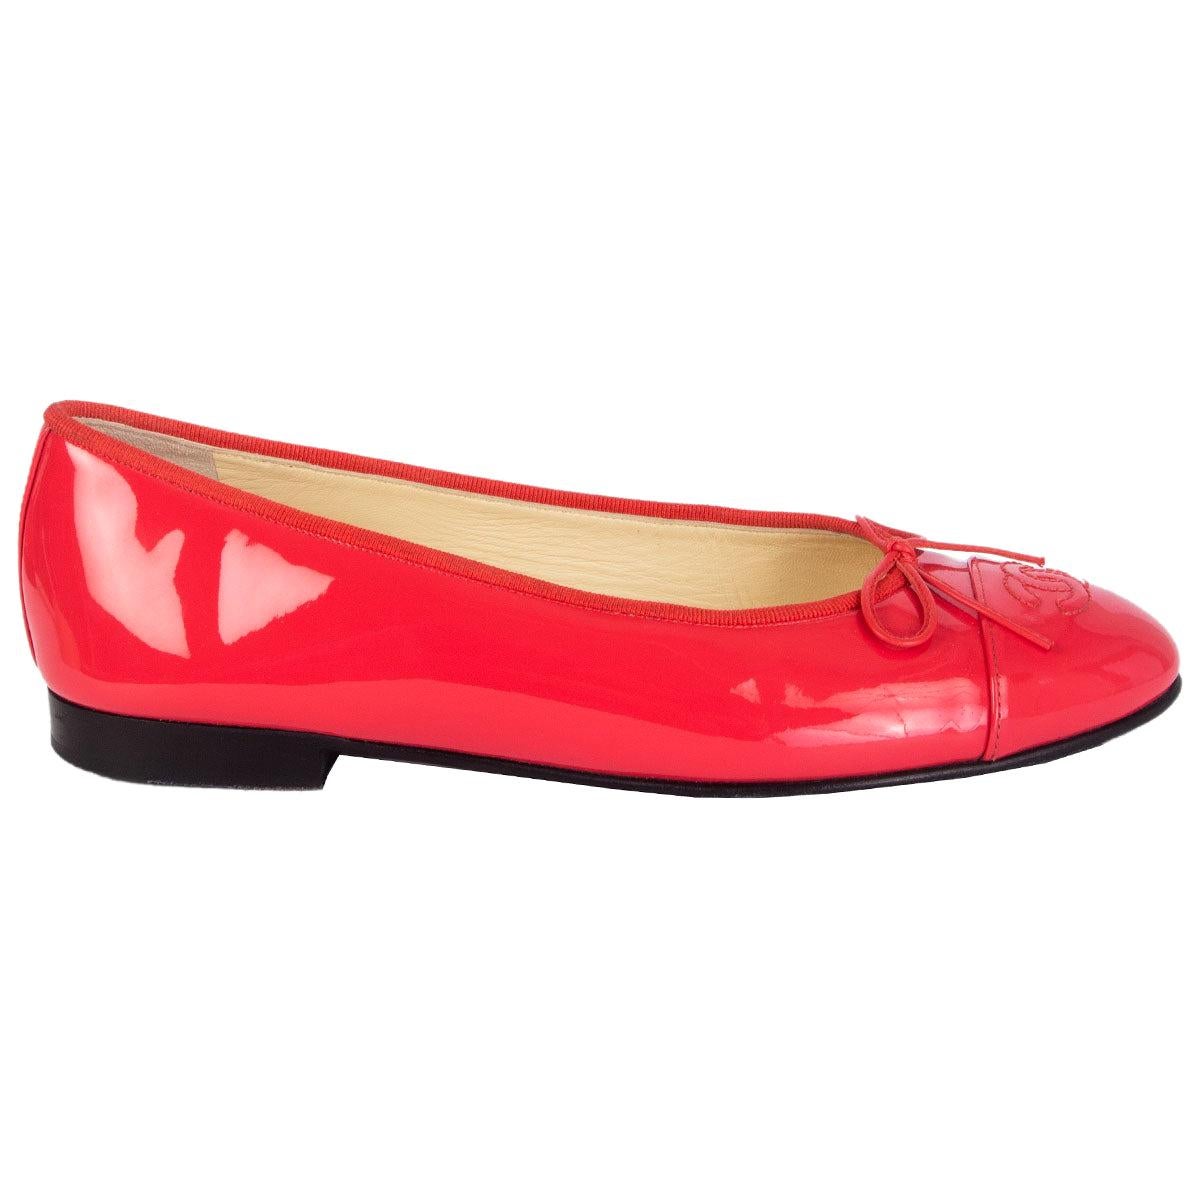 CHANEL pink patent leather Ballet Flats Shoes 39